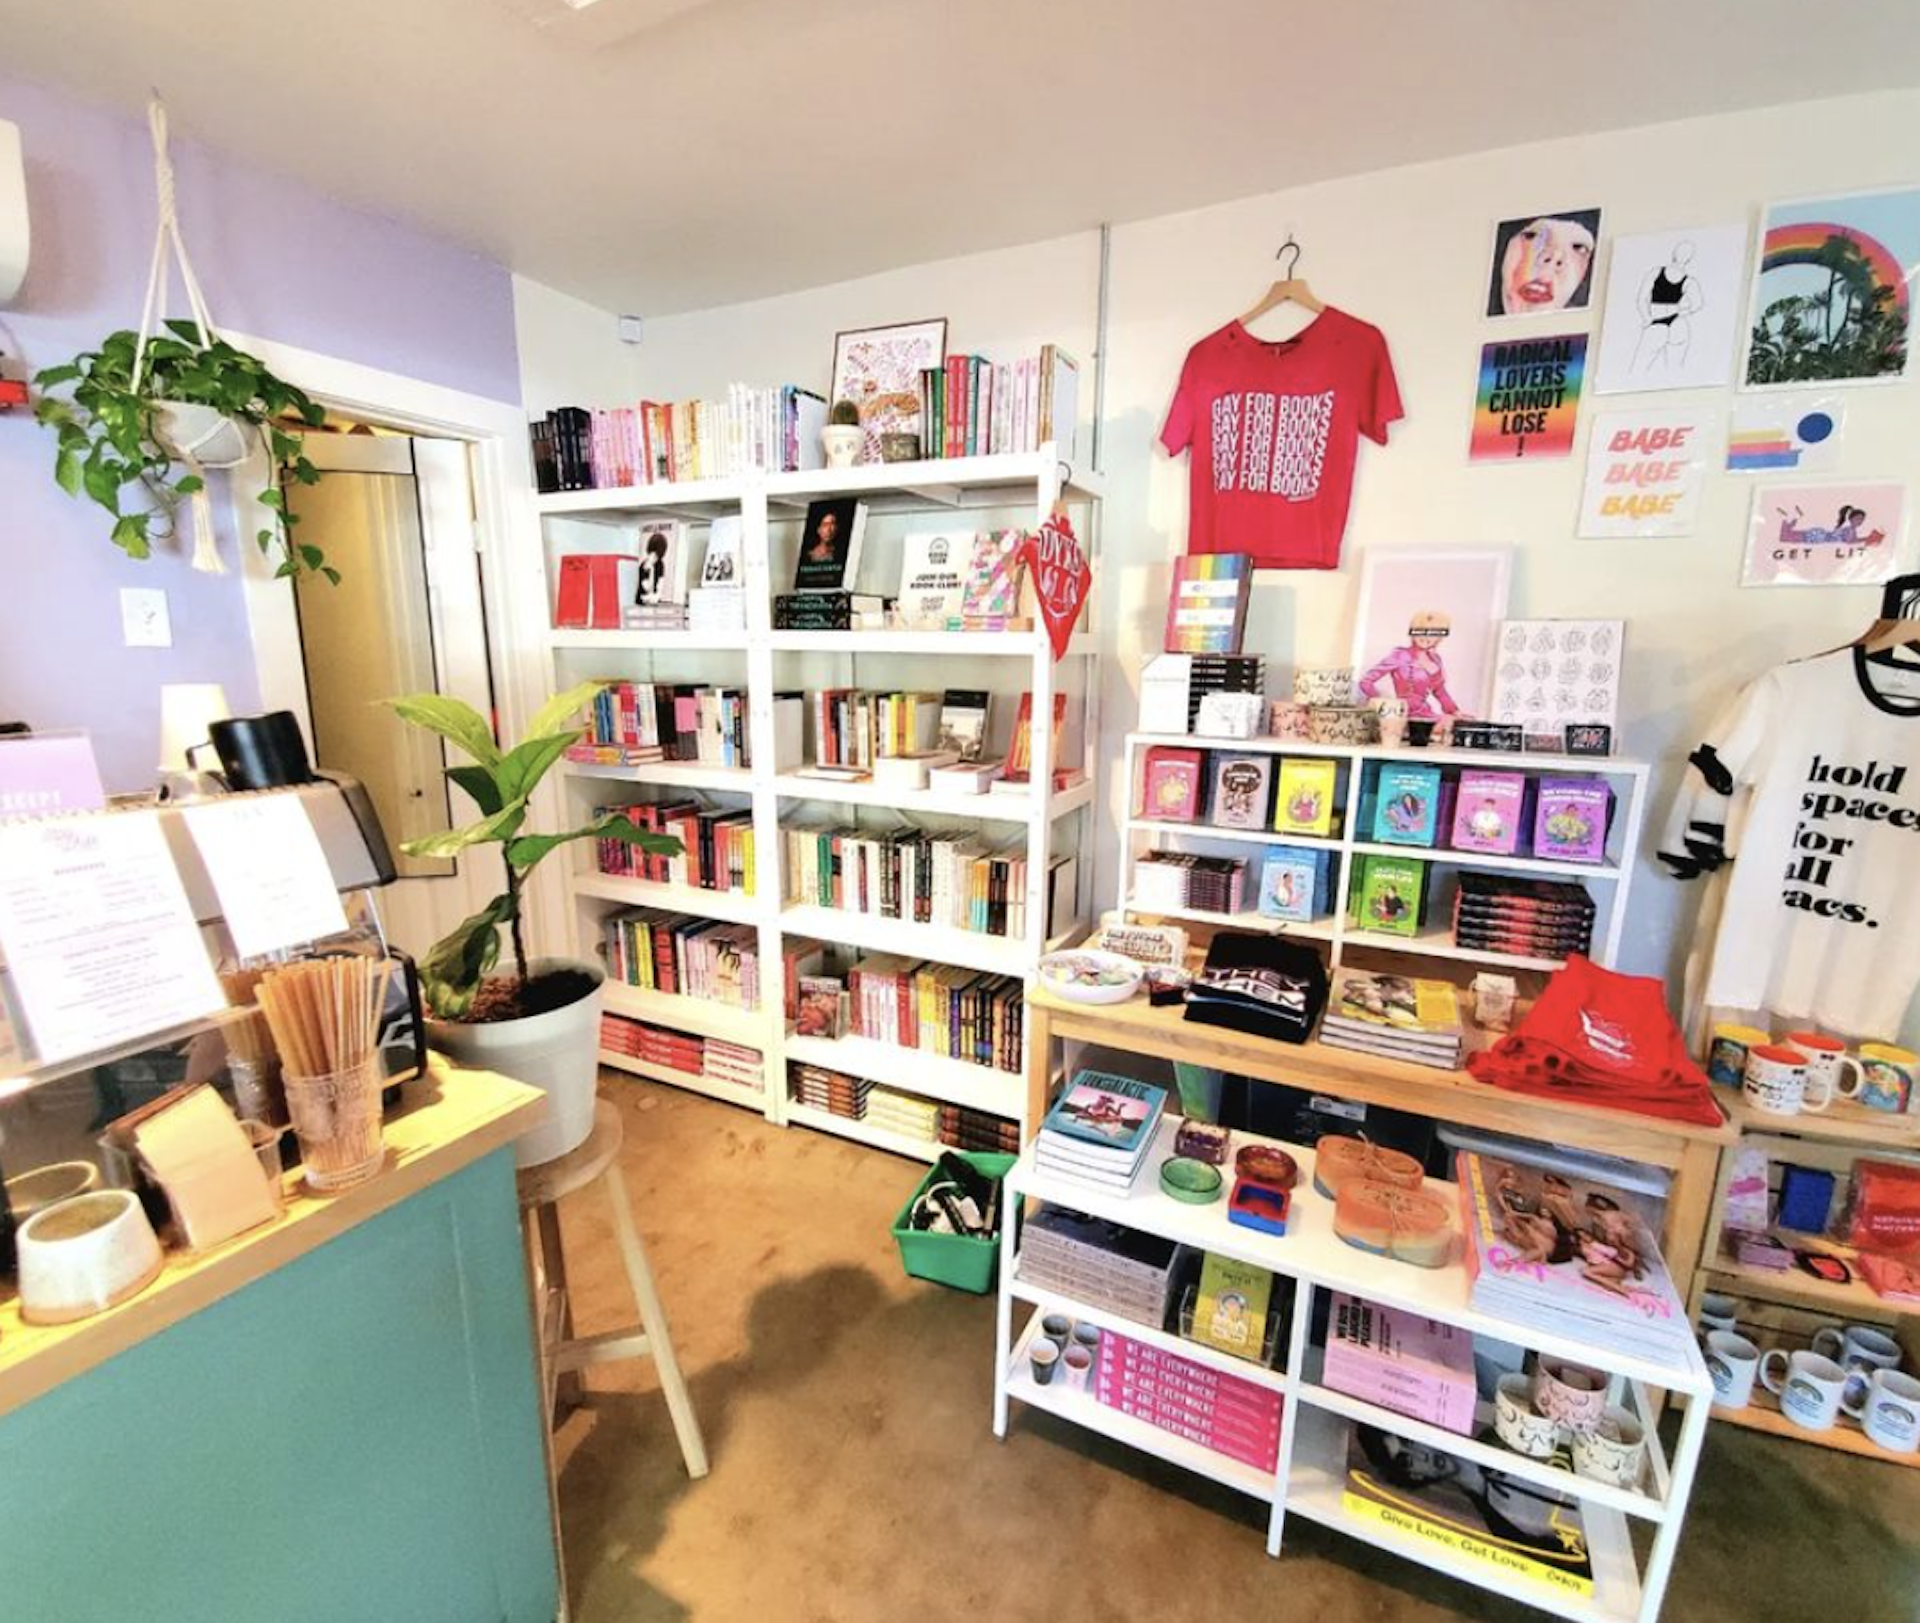 The inside of Austin's Little Gay Shop - there are t-shirts, books and artwork on the walls 